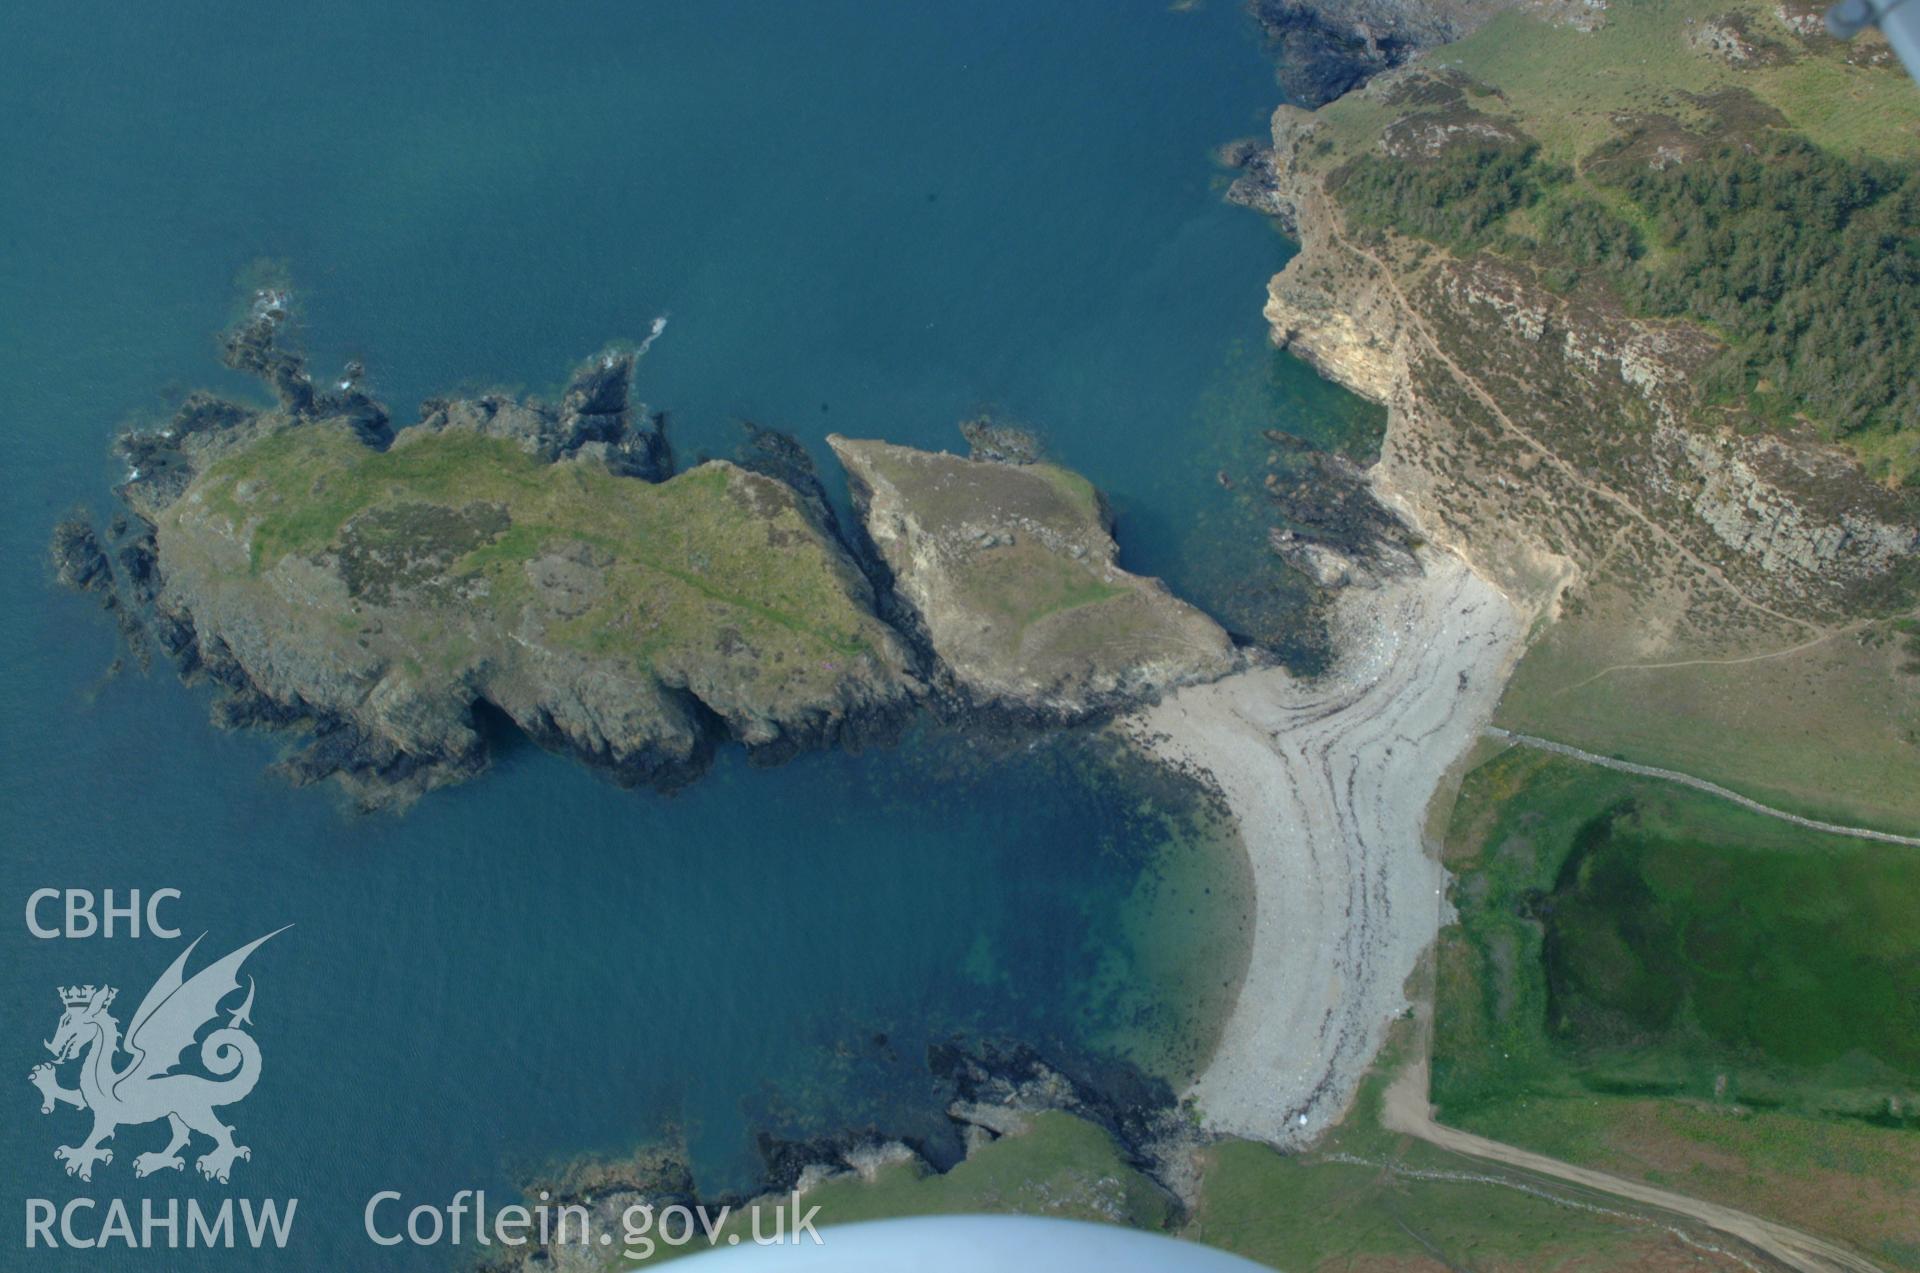 RCAHMW colour oblique aerial photograph of Ynys-y-fydlyn Promontory Fort taken on 26/05/2004 by Toby Driver